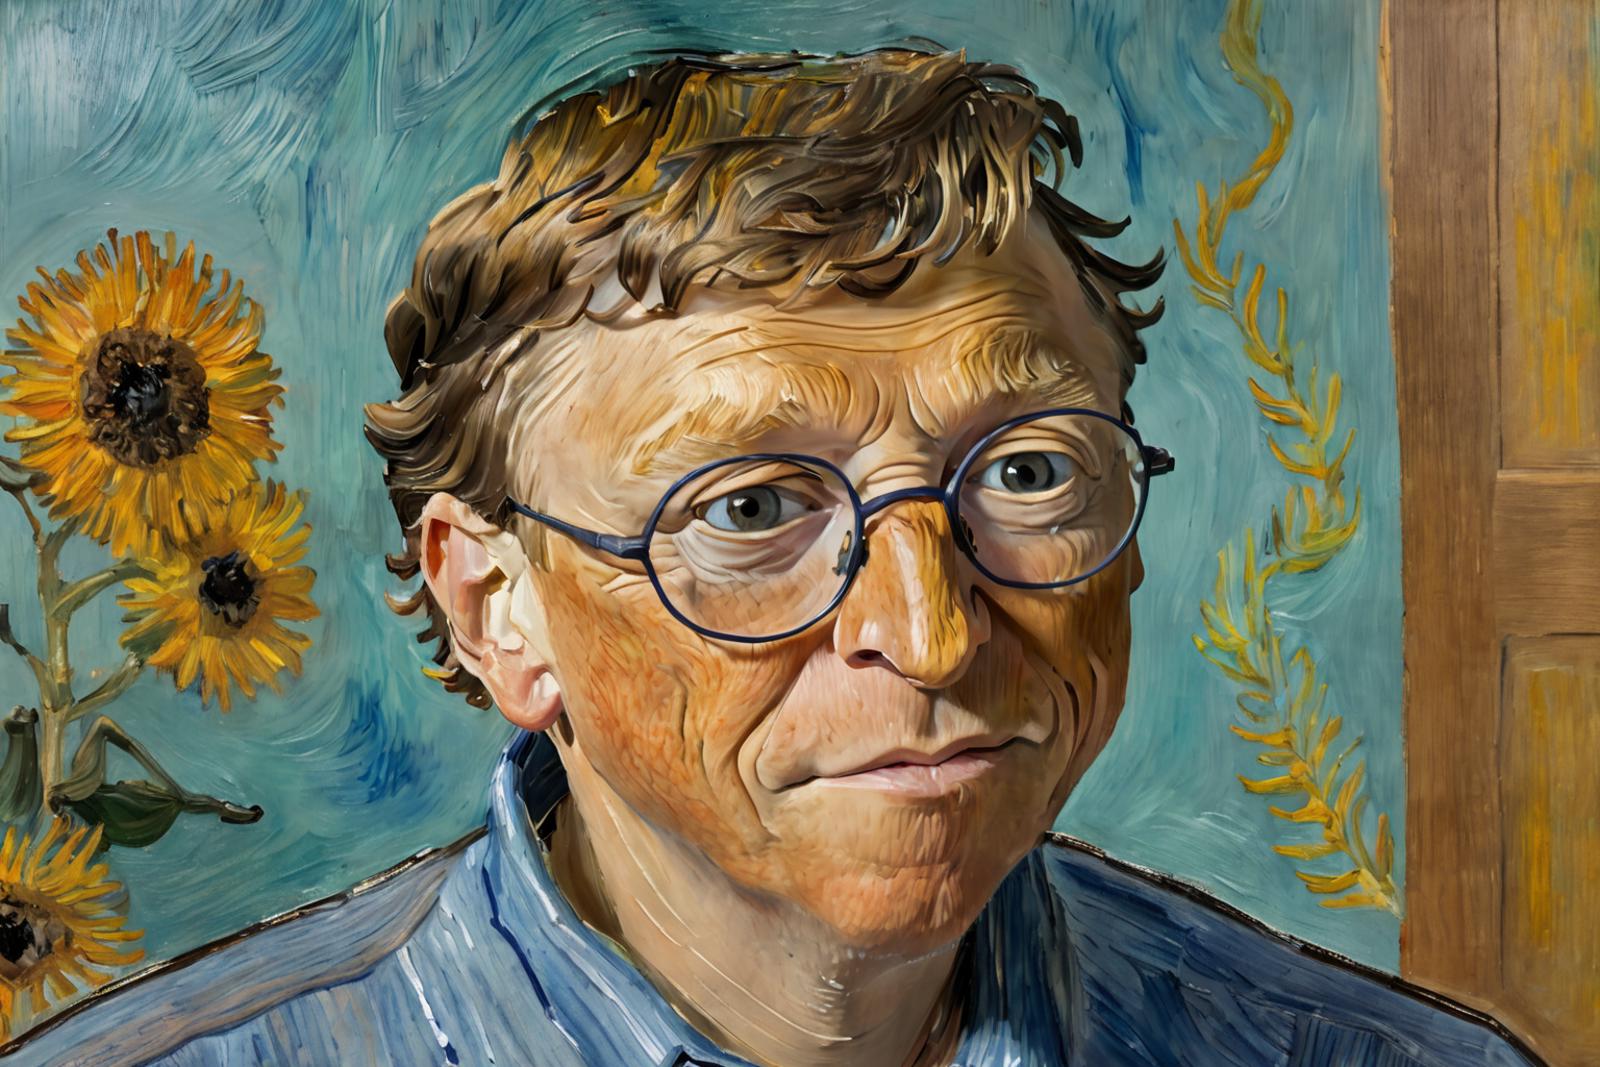 A Painting of a Man with Brown Hair, Glasses, and a Blue Shirt.